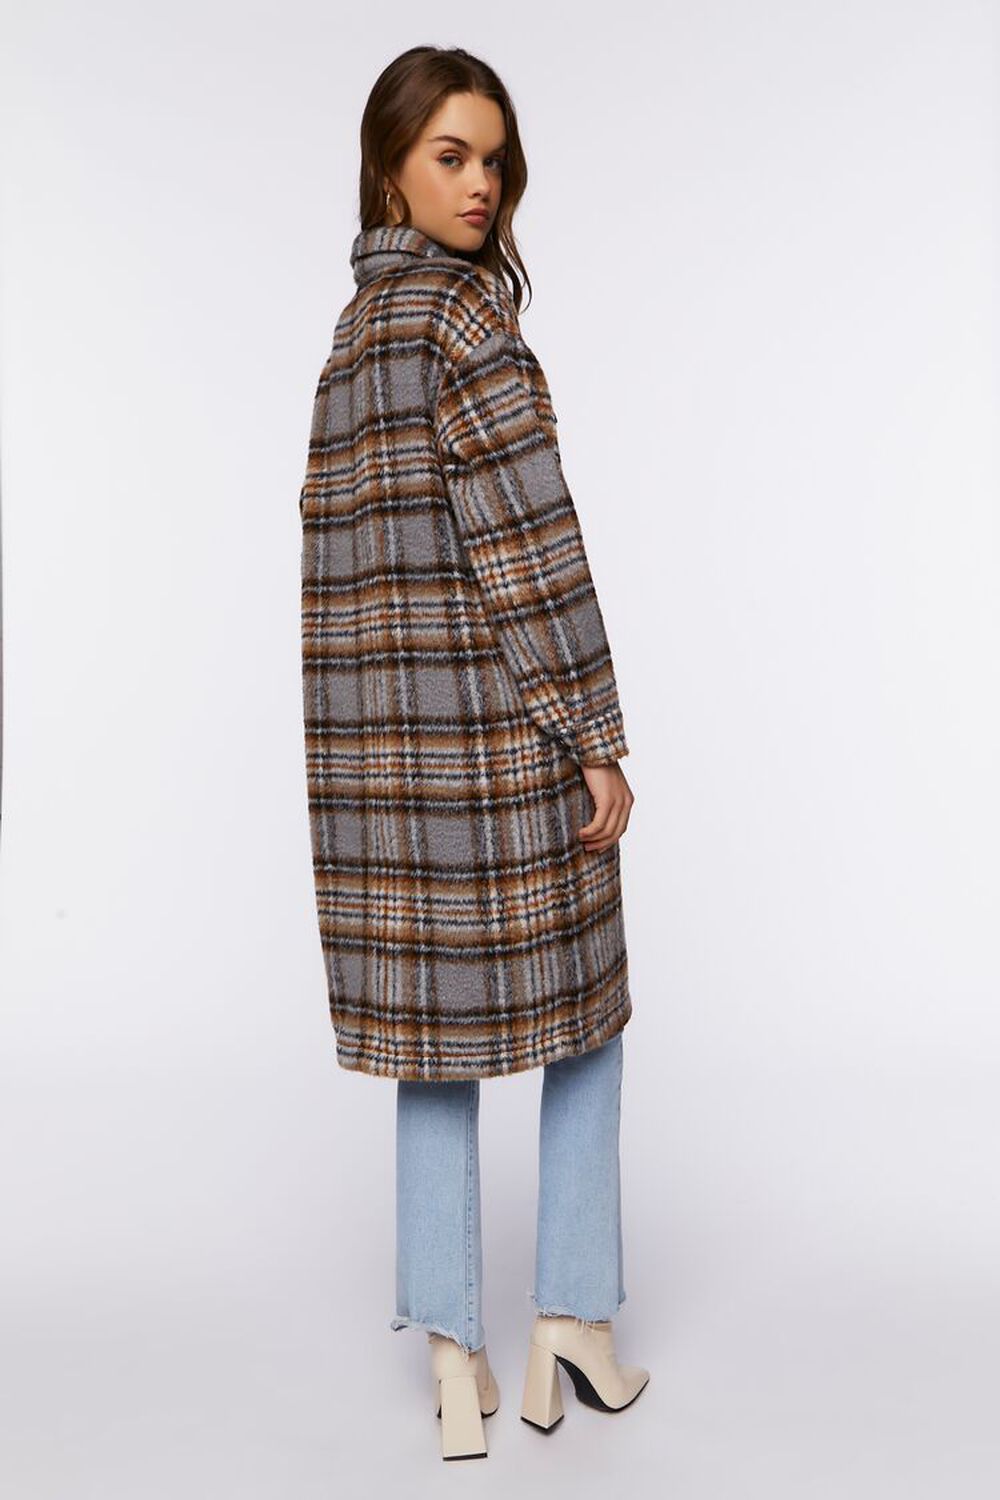 GREY/MULTI Plaid Buttoned Duster Jacket, image 3